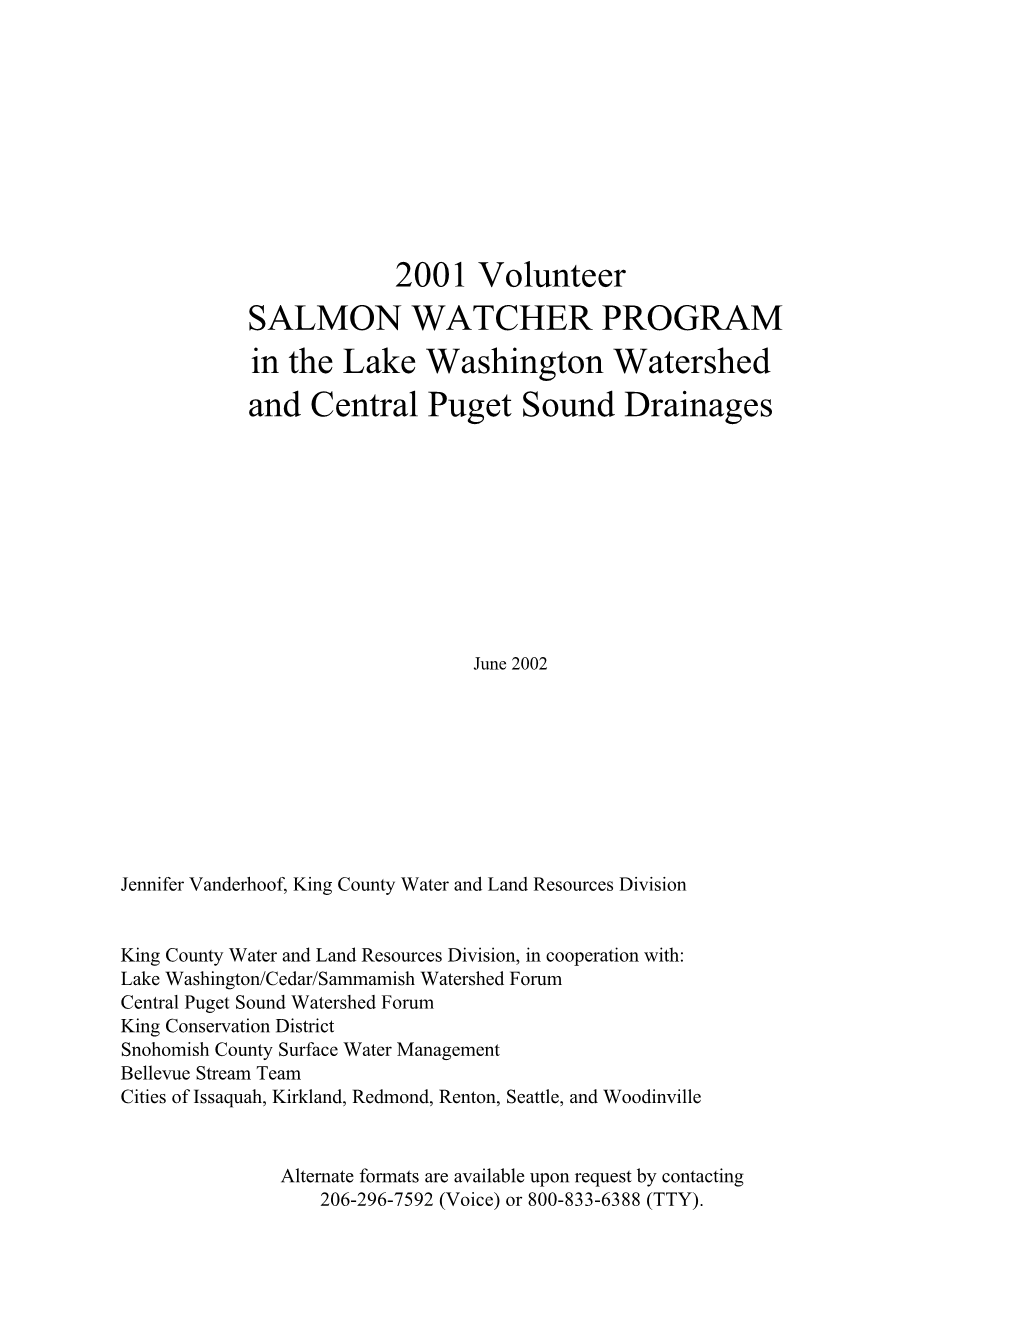 2001 Volunteer SALMON WATCHER PROGRAM in the Lake Washington Watershed and Central Puget Sound Drainages